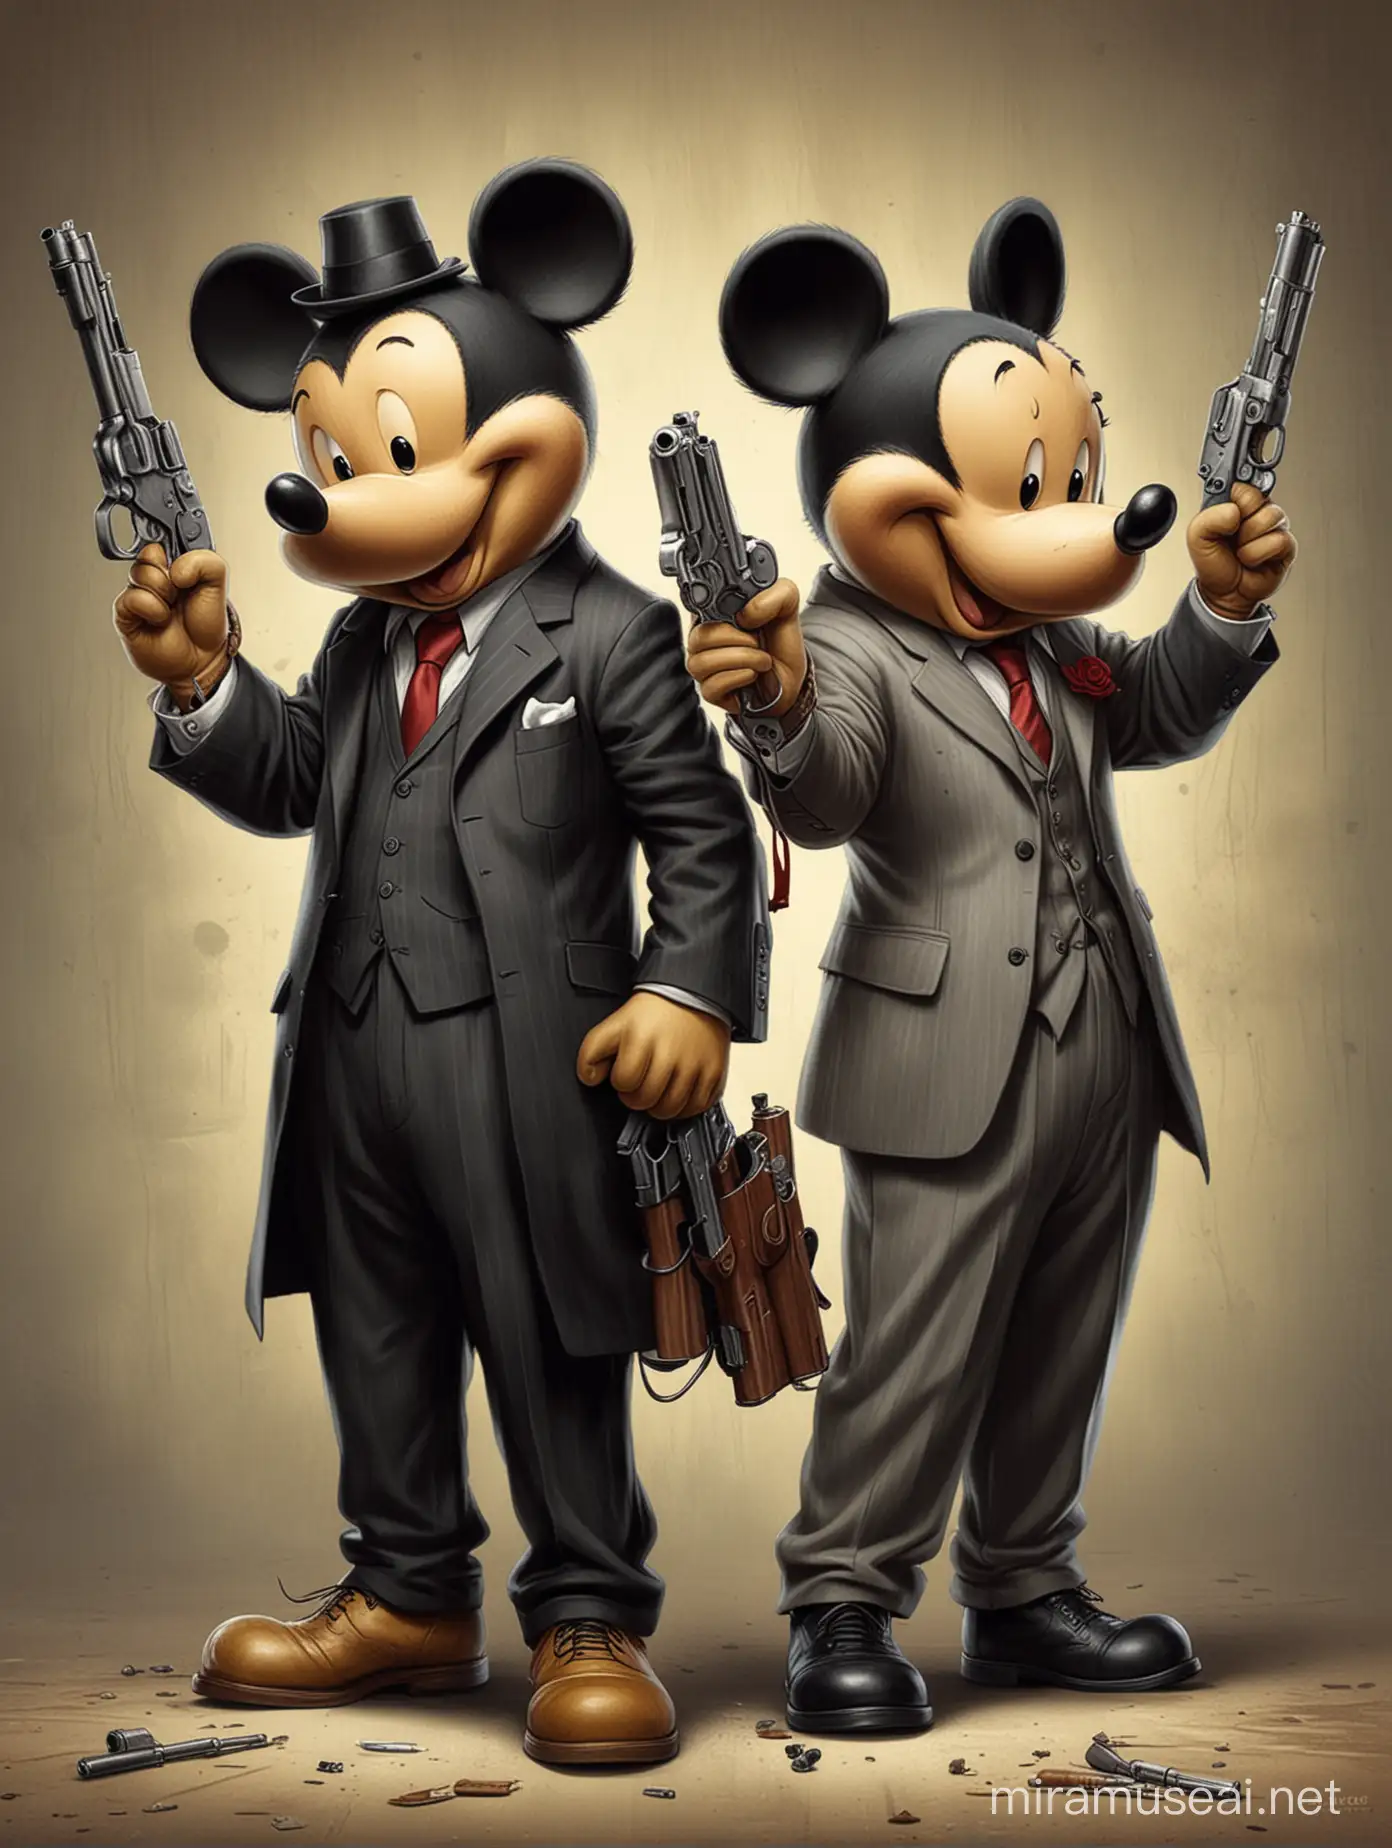 create only two people  Mickey Mouse and Winnie the Pooh being gangsters dressed up in suits stylized in 2000's with guns in hands